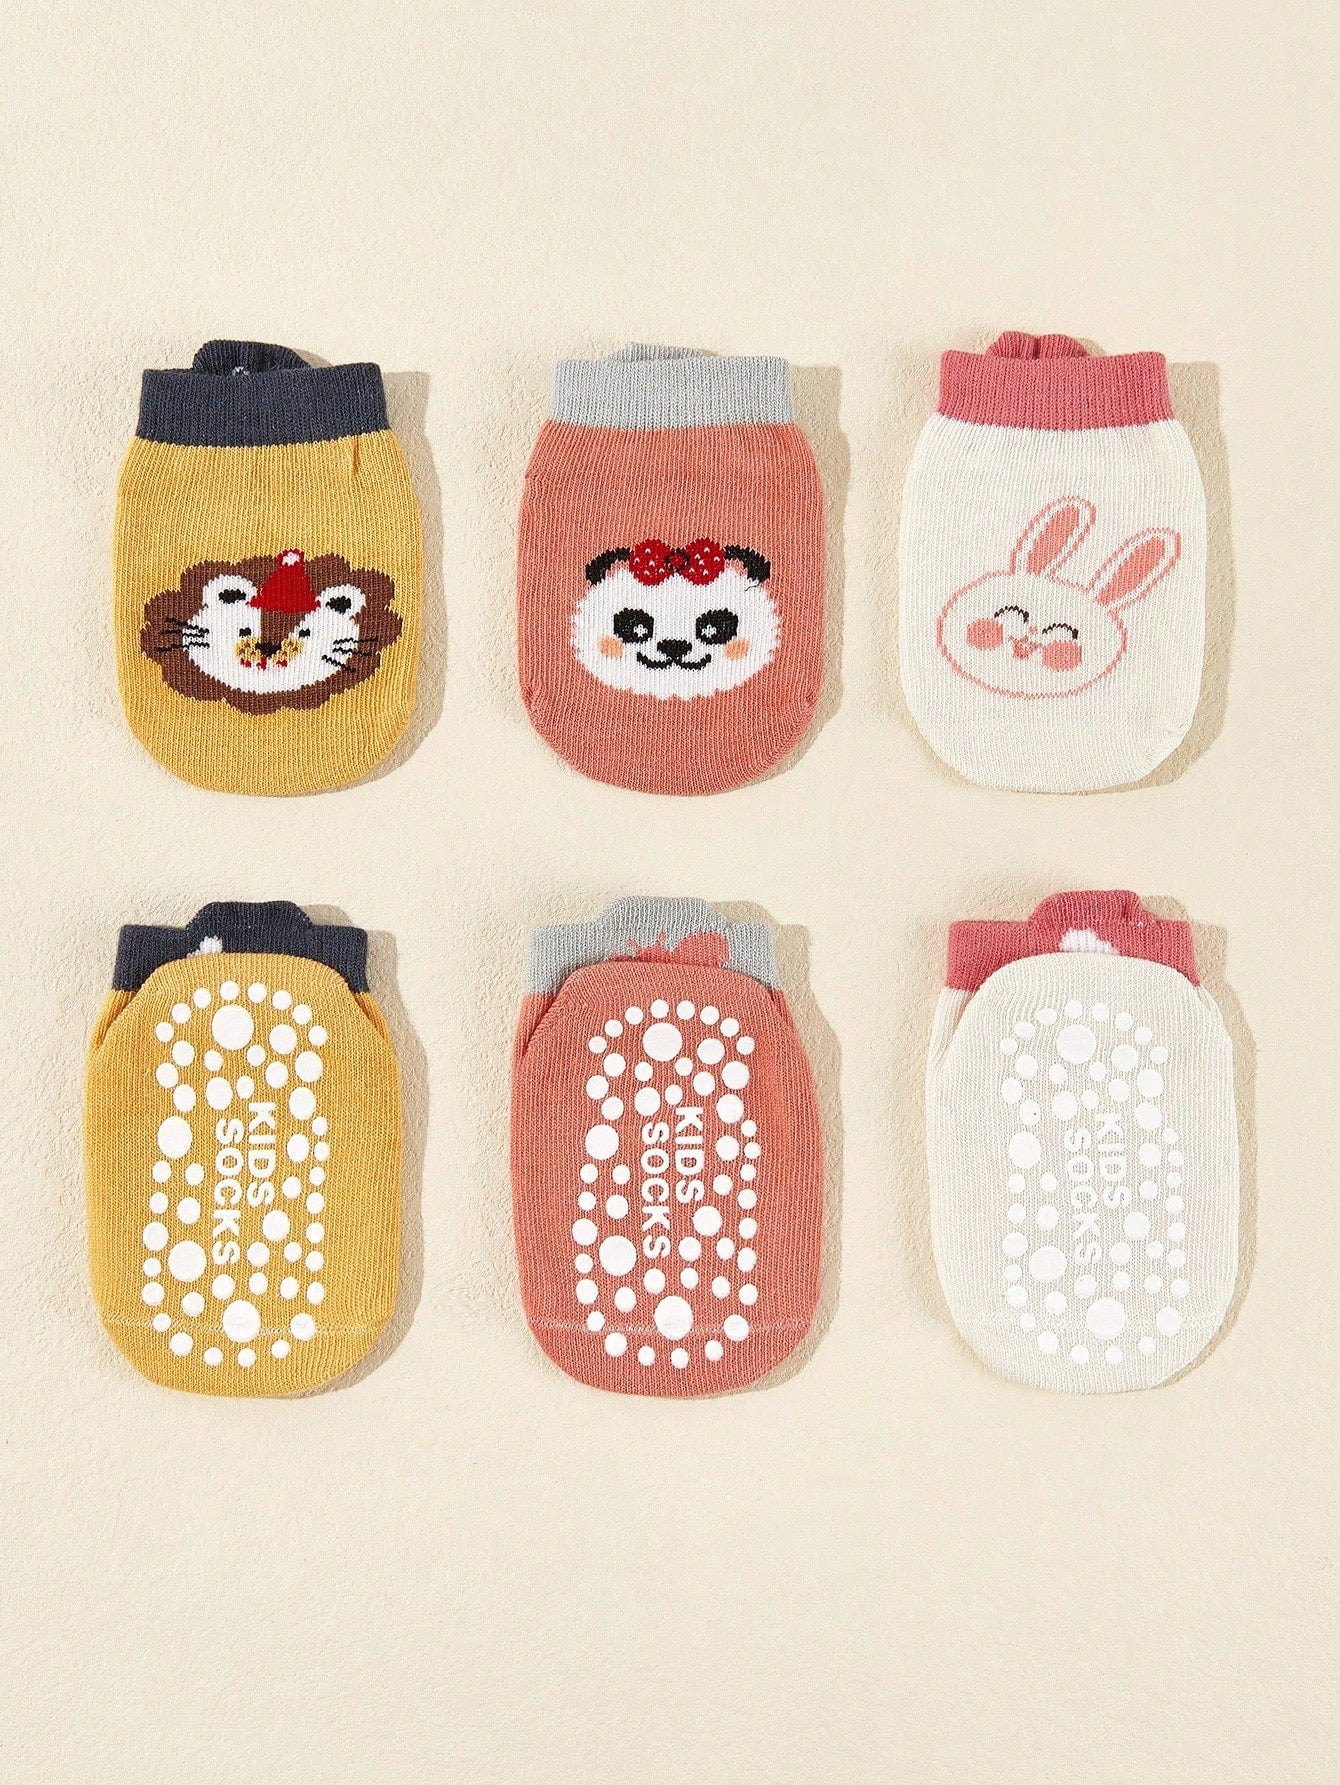 5 Pairs Non-Slip Cartoon Pattern Cute Kids' Boat Socks With Rubber Grips